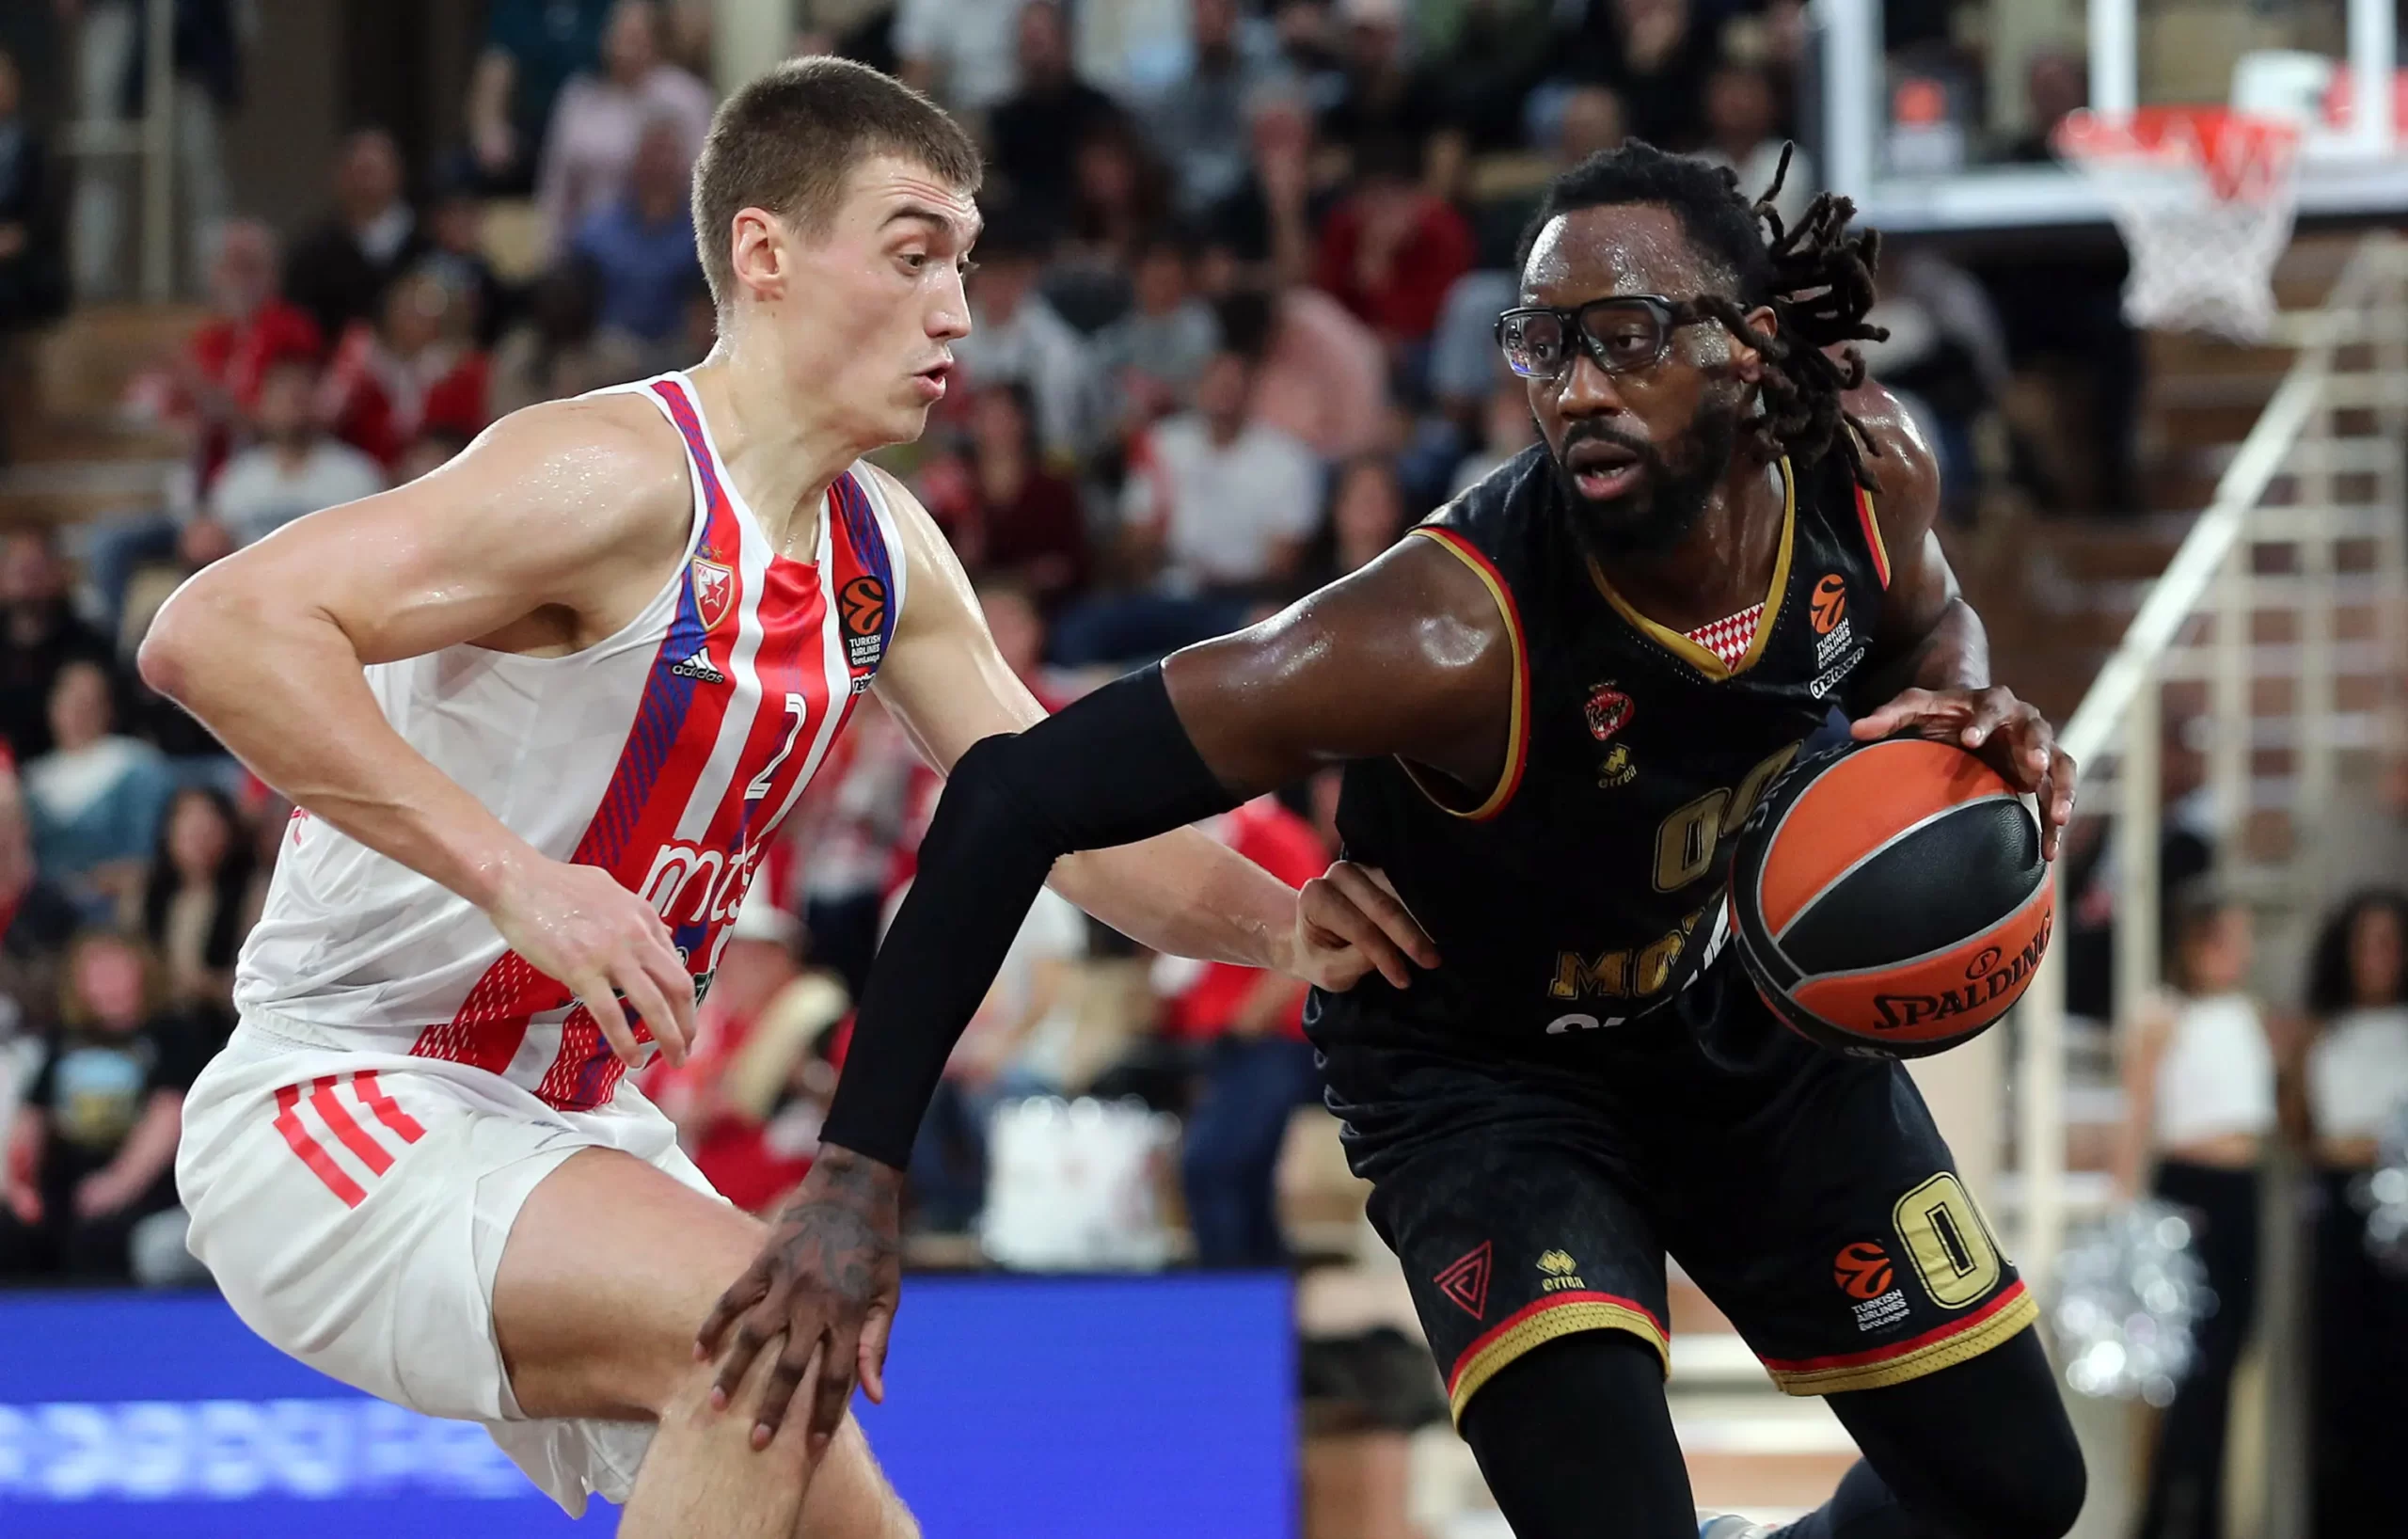 The ex- Dallas Mavericks Kemba Walker shows no regret over his NBA exit choice while explaining “having a great time” with his new European team Monaco